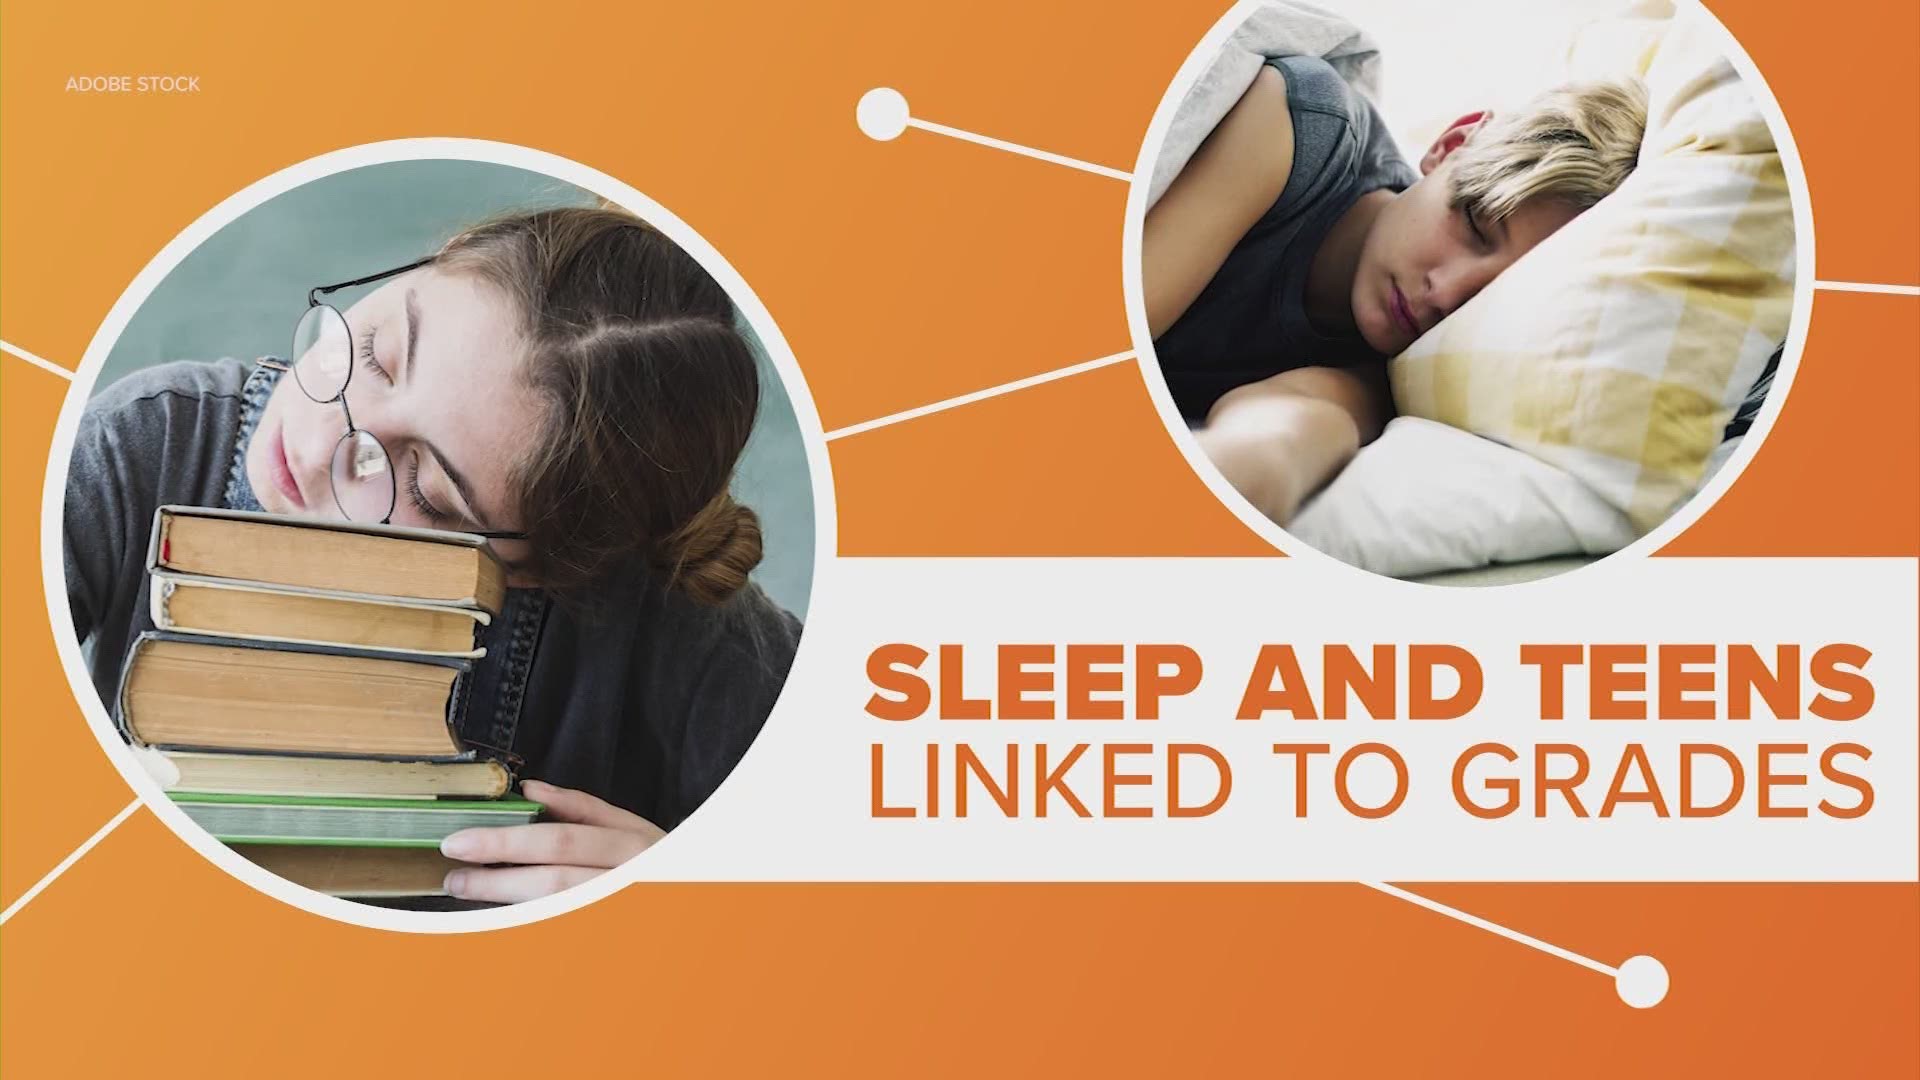 Teenagers, especially those with ADHD, can see lower test scores with less sleep. Let's connect the dots.